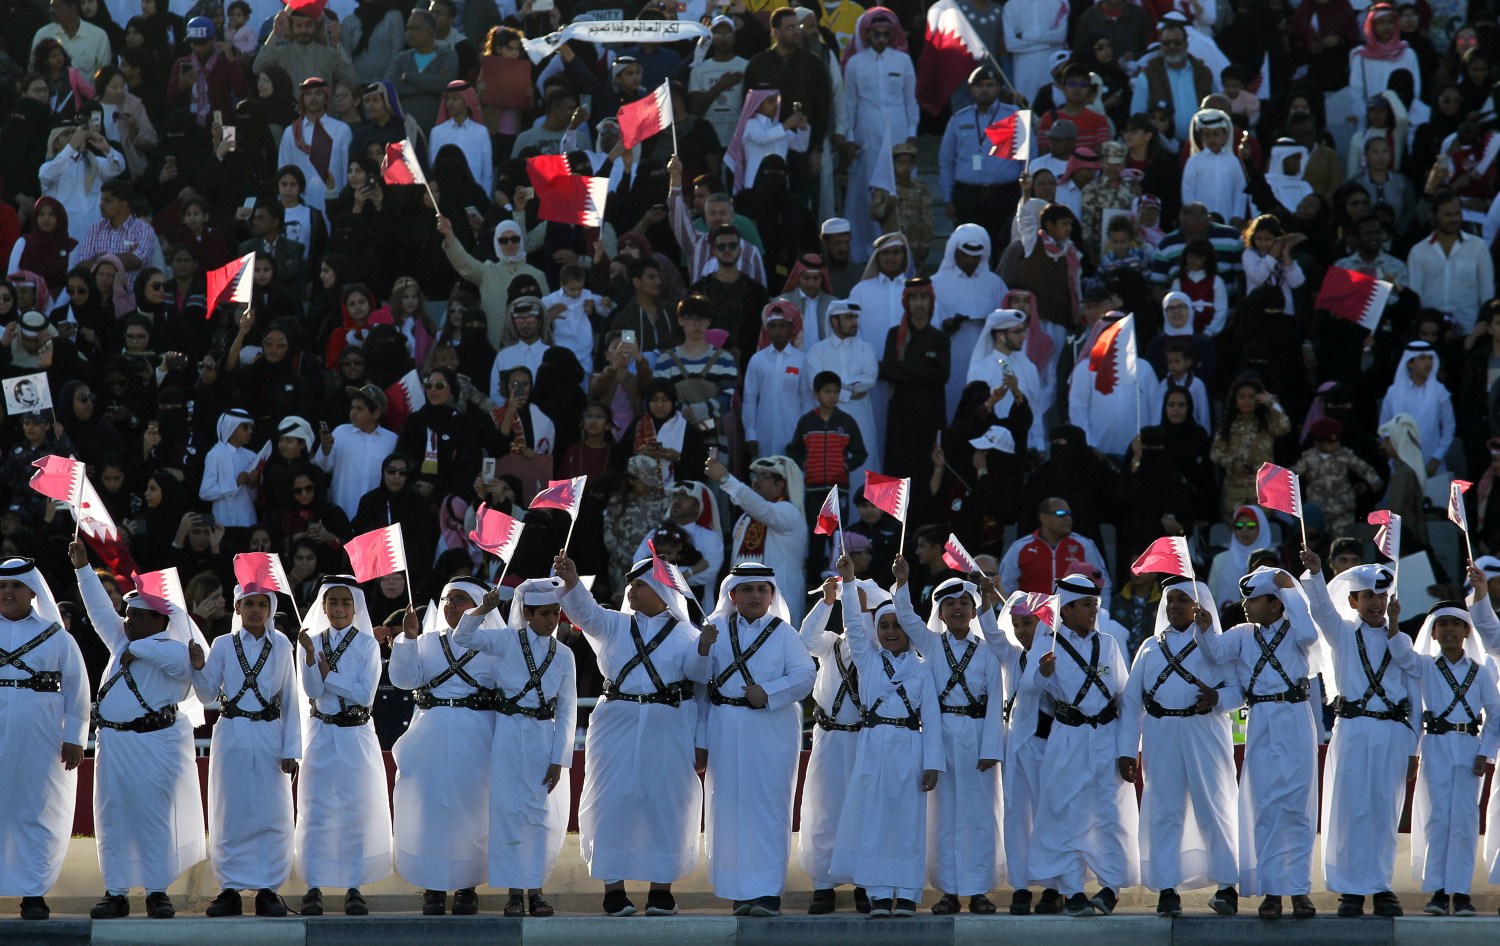 Boys hold Qatari flags as they take part in Qatar's National Day celebrations in Doha, Qatar, December 18, 2017. REUTERS/Naseem Zeitoon